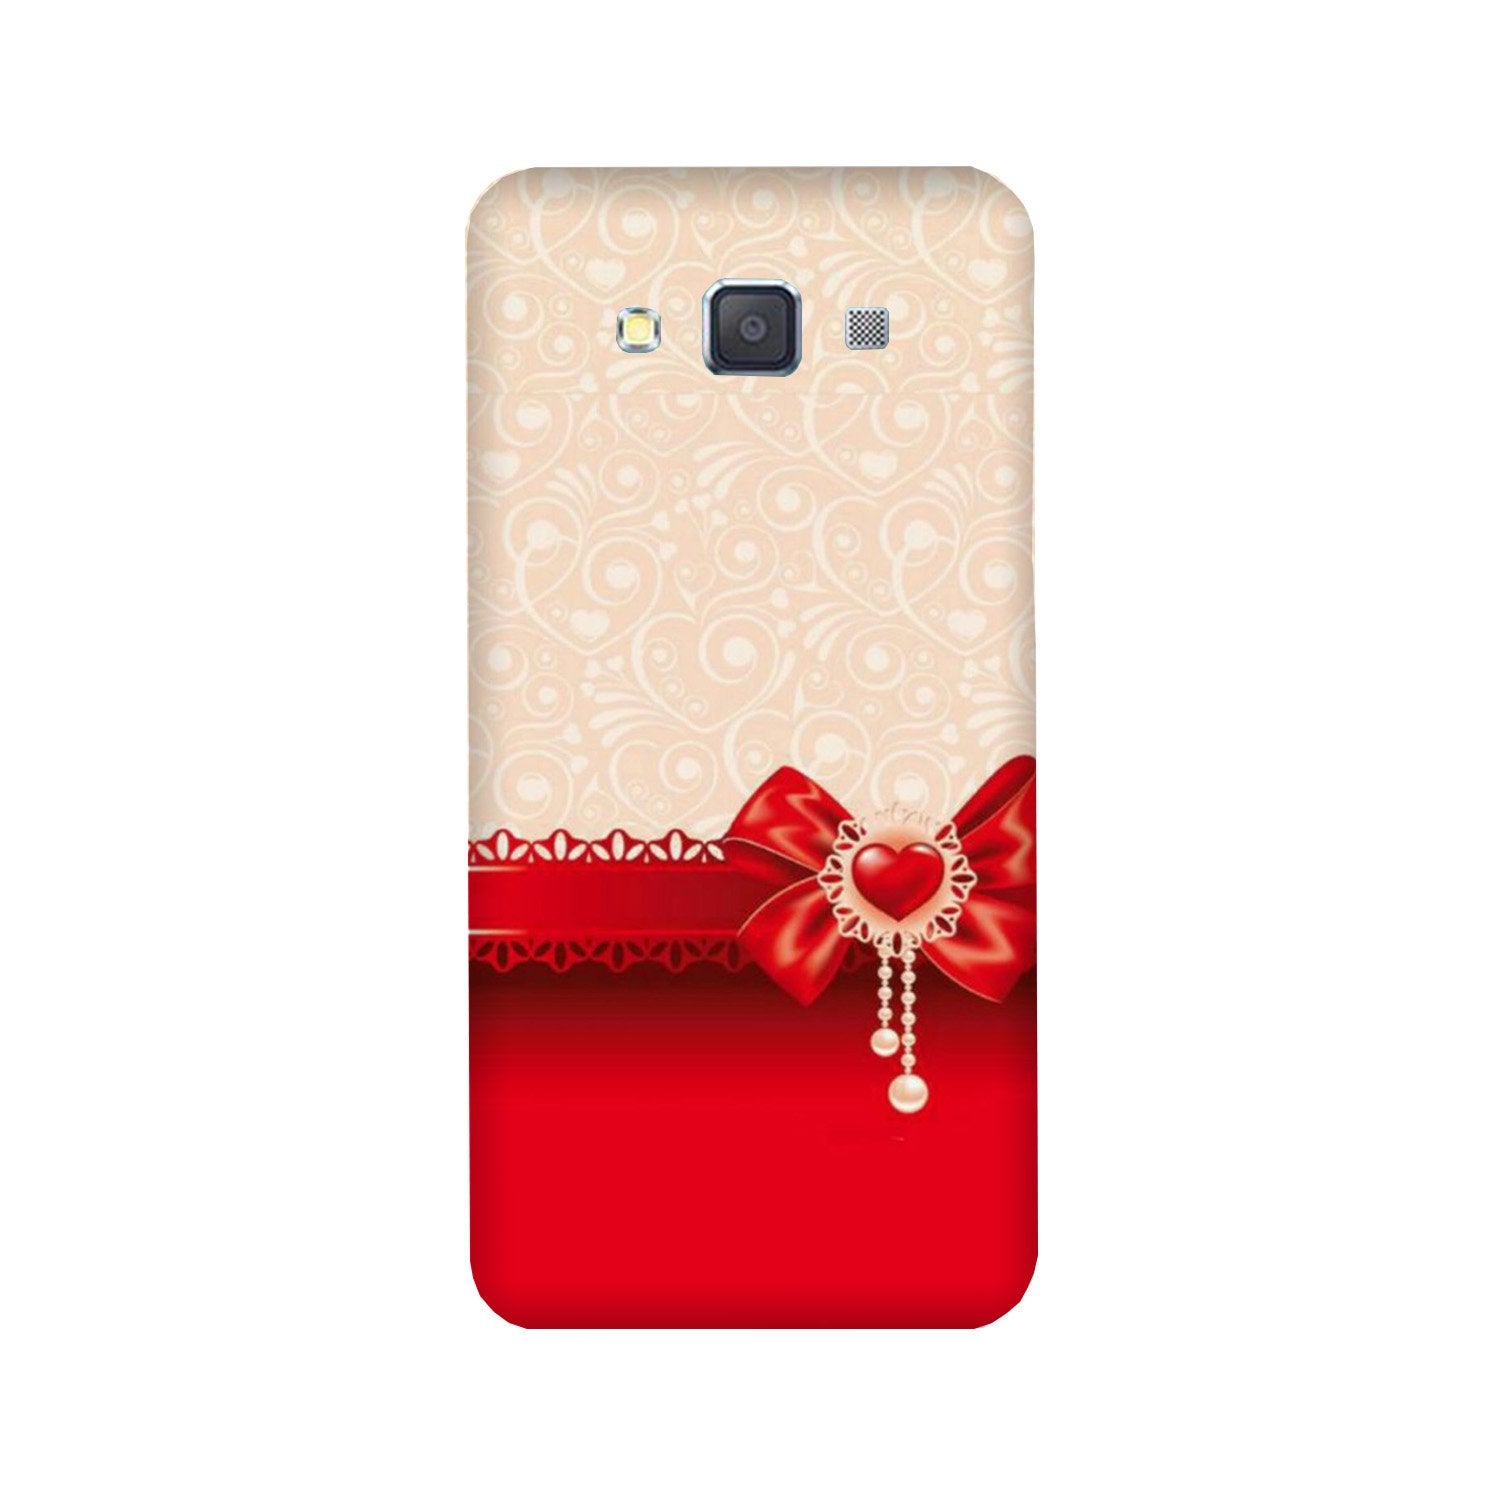 Gift Wrap3 Case for Galaxy Grand 2